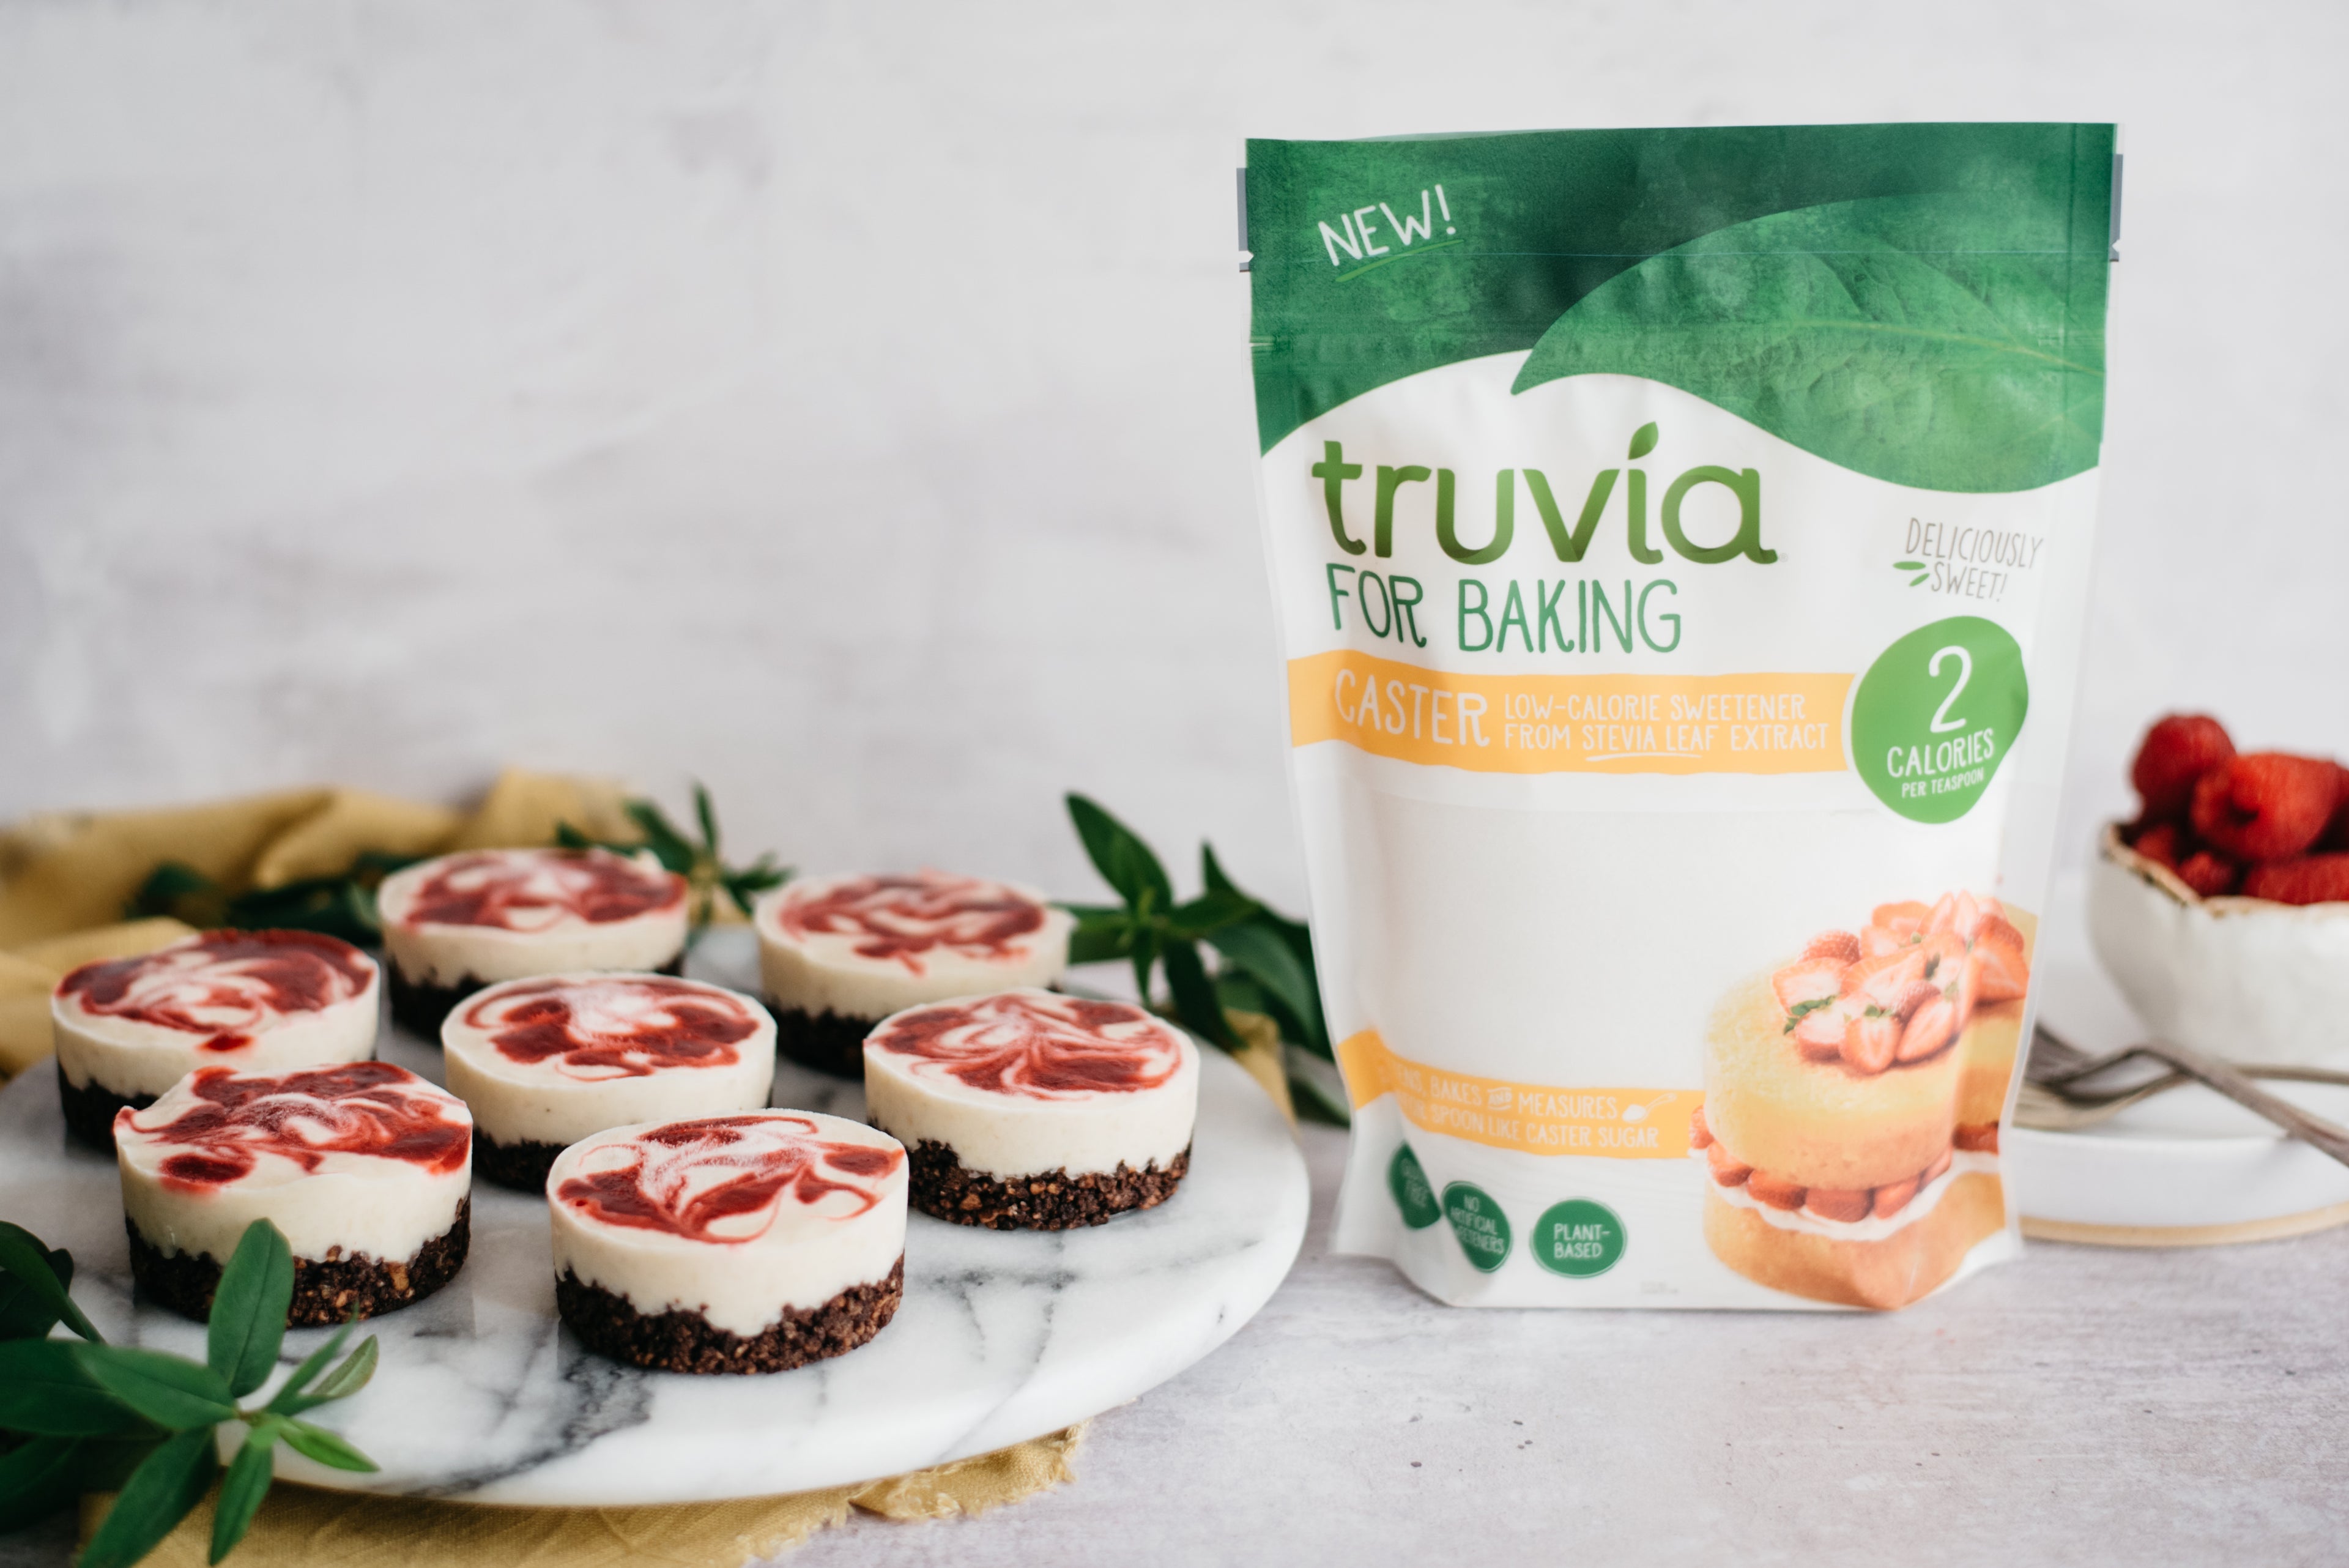 A plate of raspberry and banana cheesecake cups next to a pack of truvia for baking caster